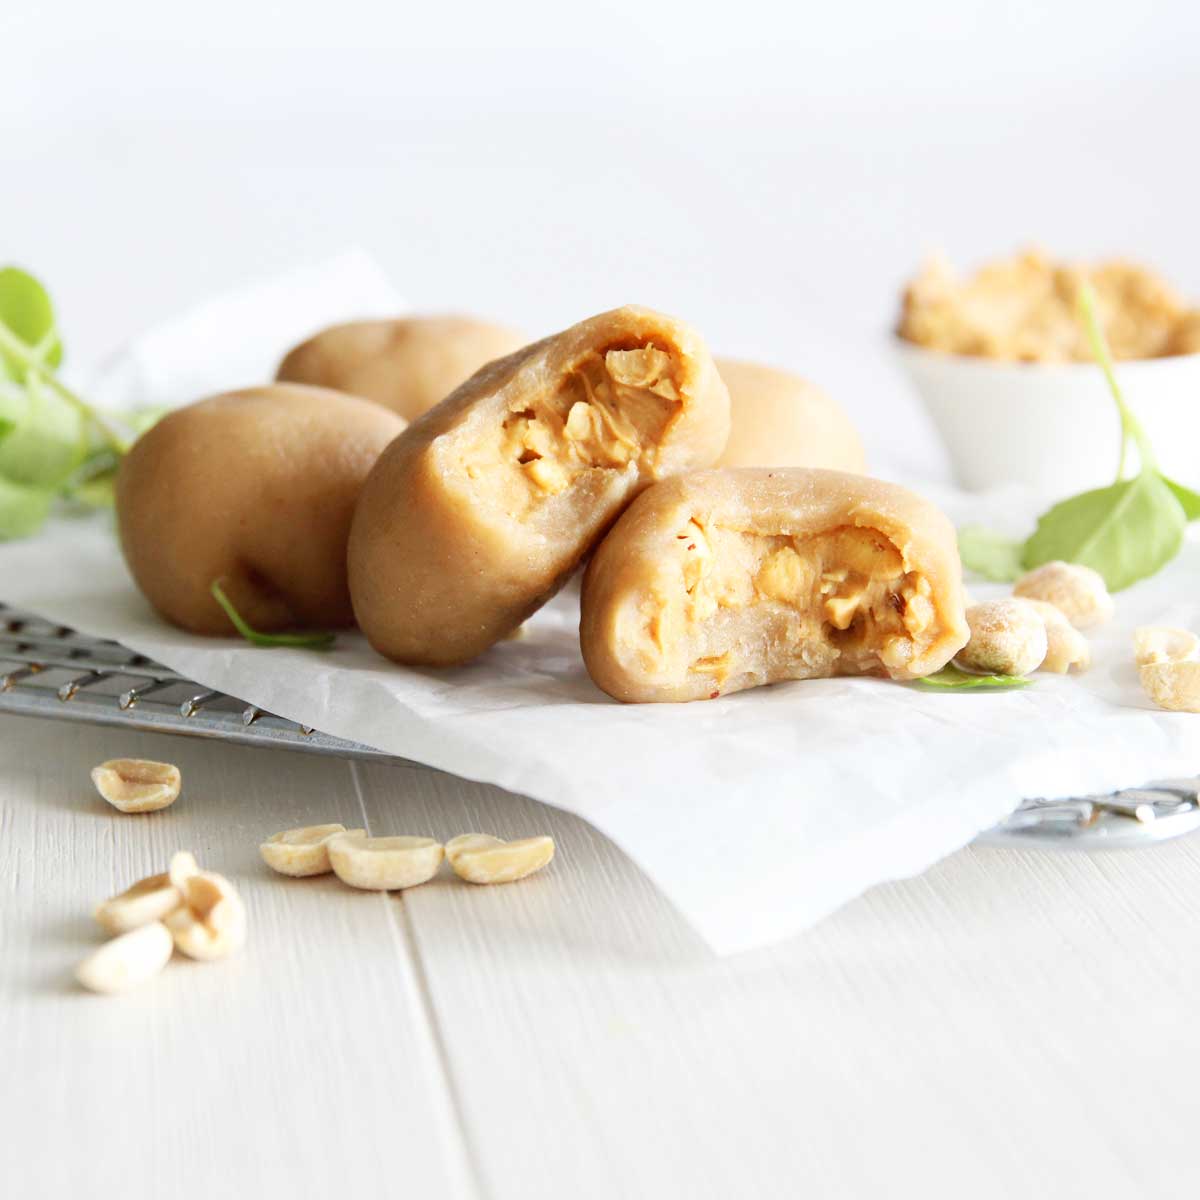 Chinese-Styled Peanut Butter Mochi Made in the Microwave - Red Bean Mochi Cake